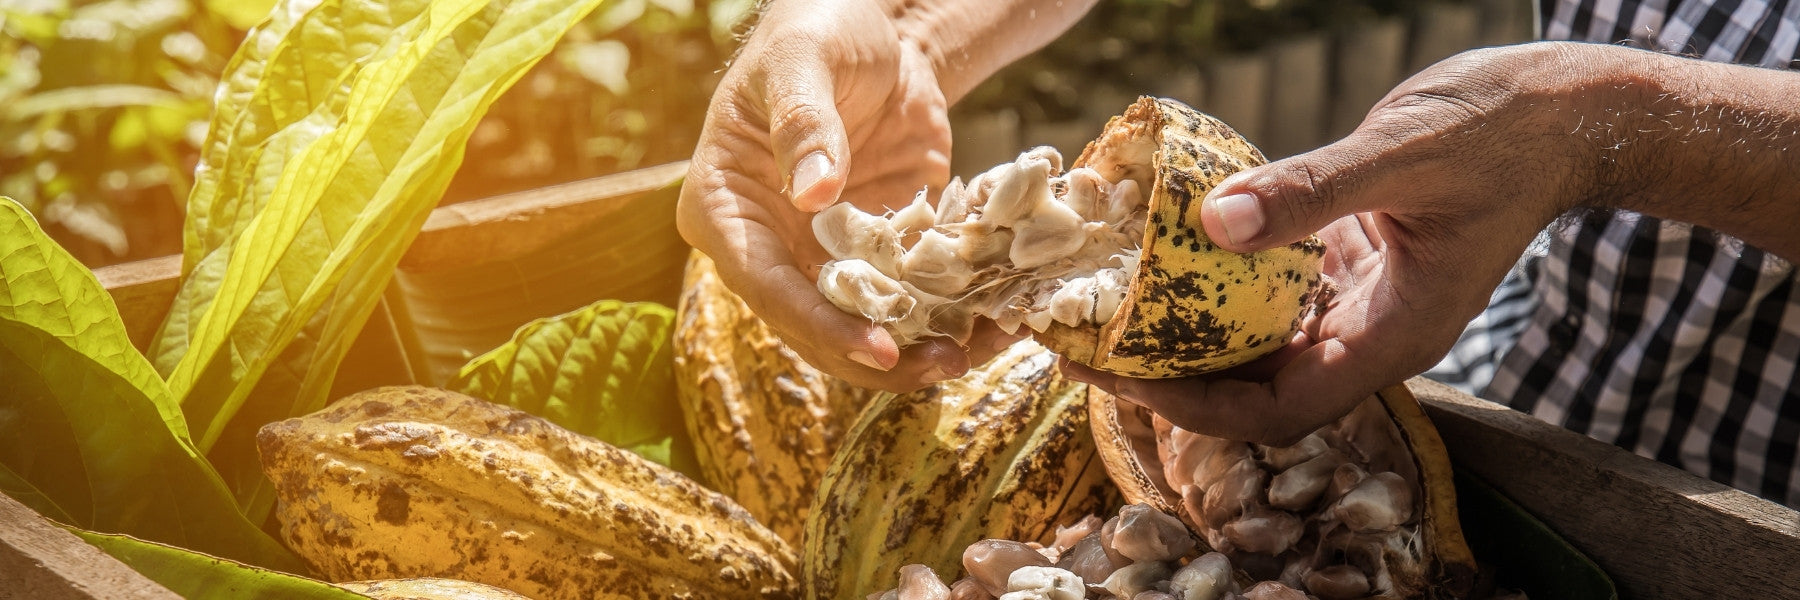 Man opening a cacao seed to remove cocoa beans